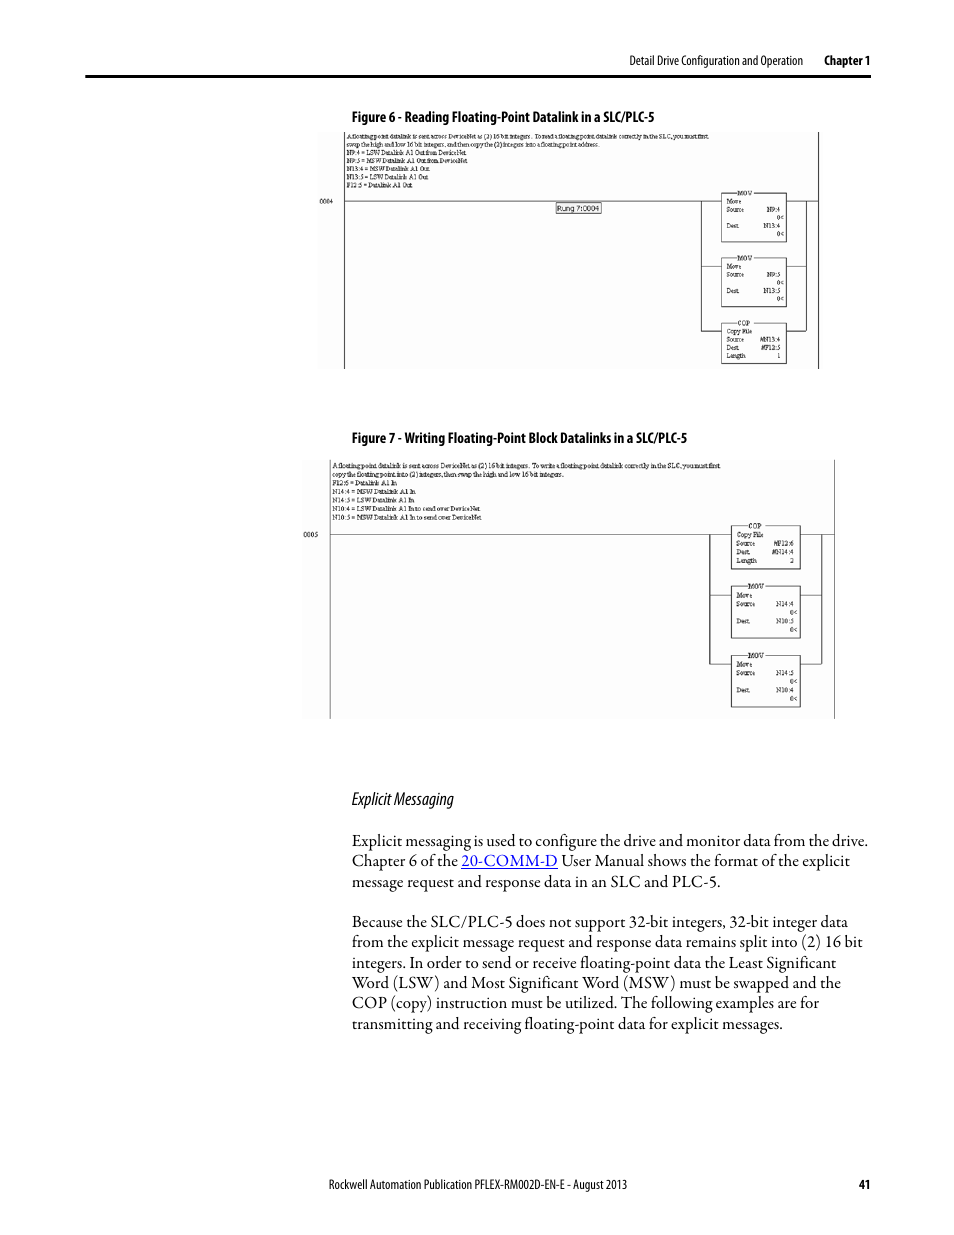 Rockwell Automation 20D PowerFlex 700S with Phase I Control Reference Manual User Manual | Page 41 / 190